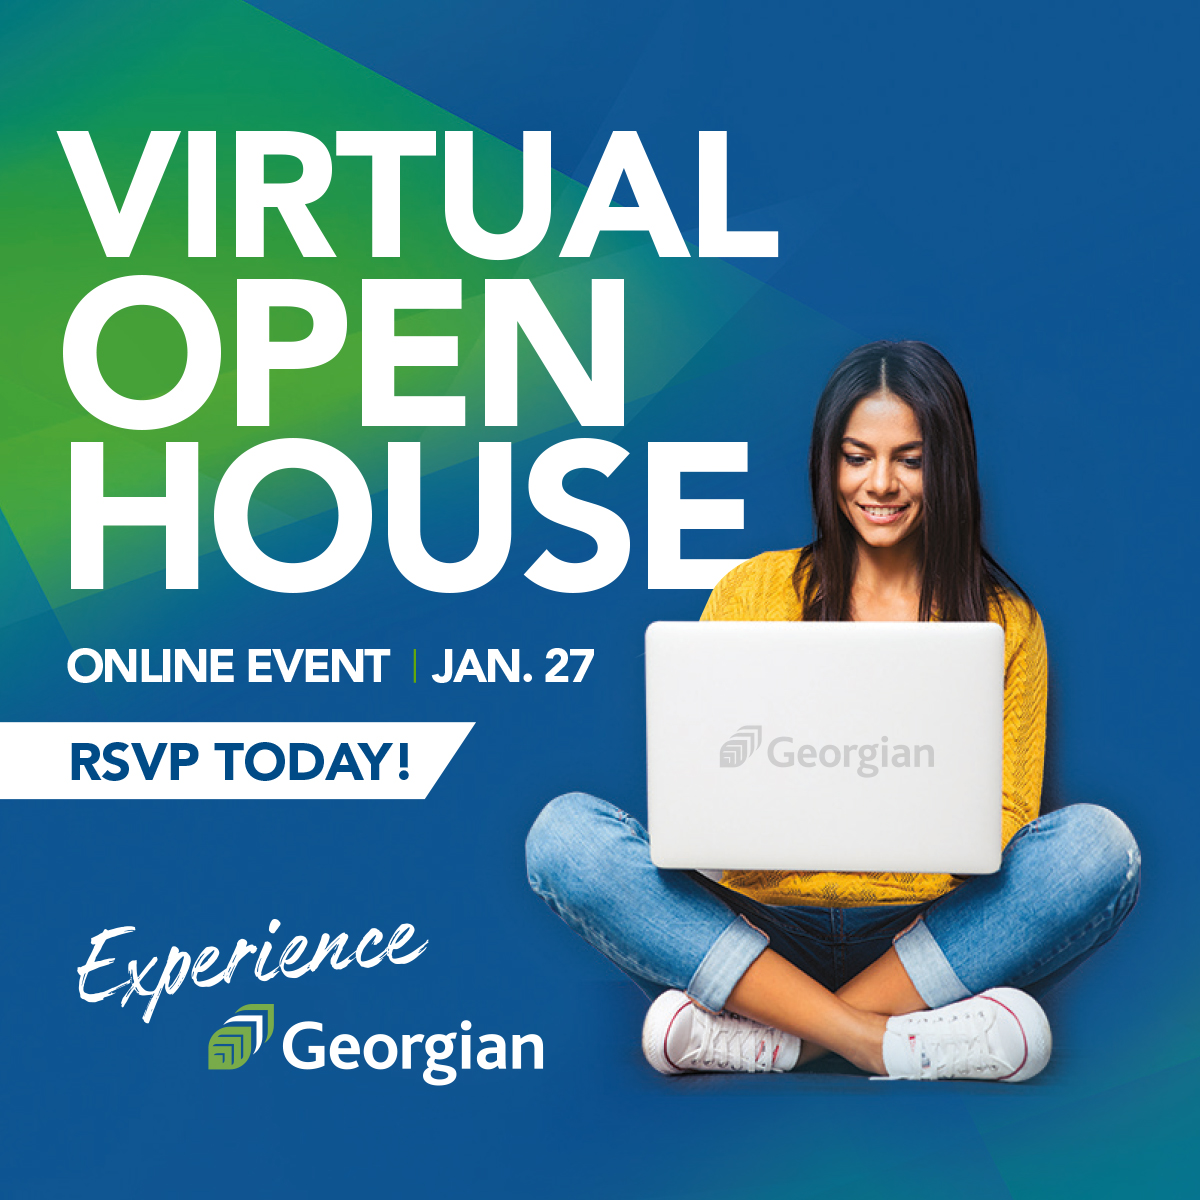 Virtual Open House Online Event